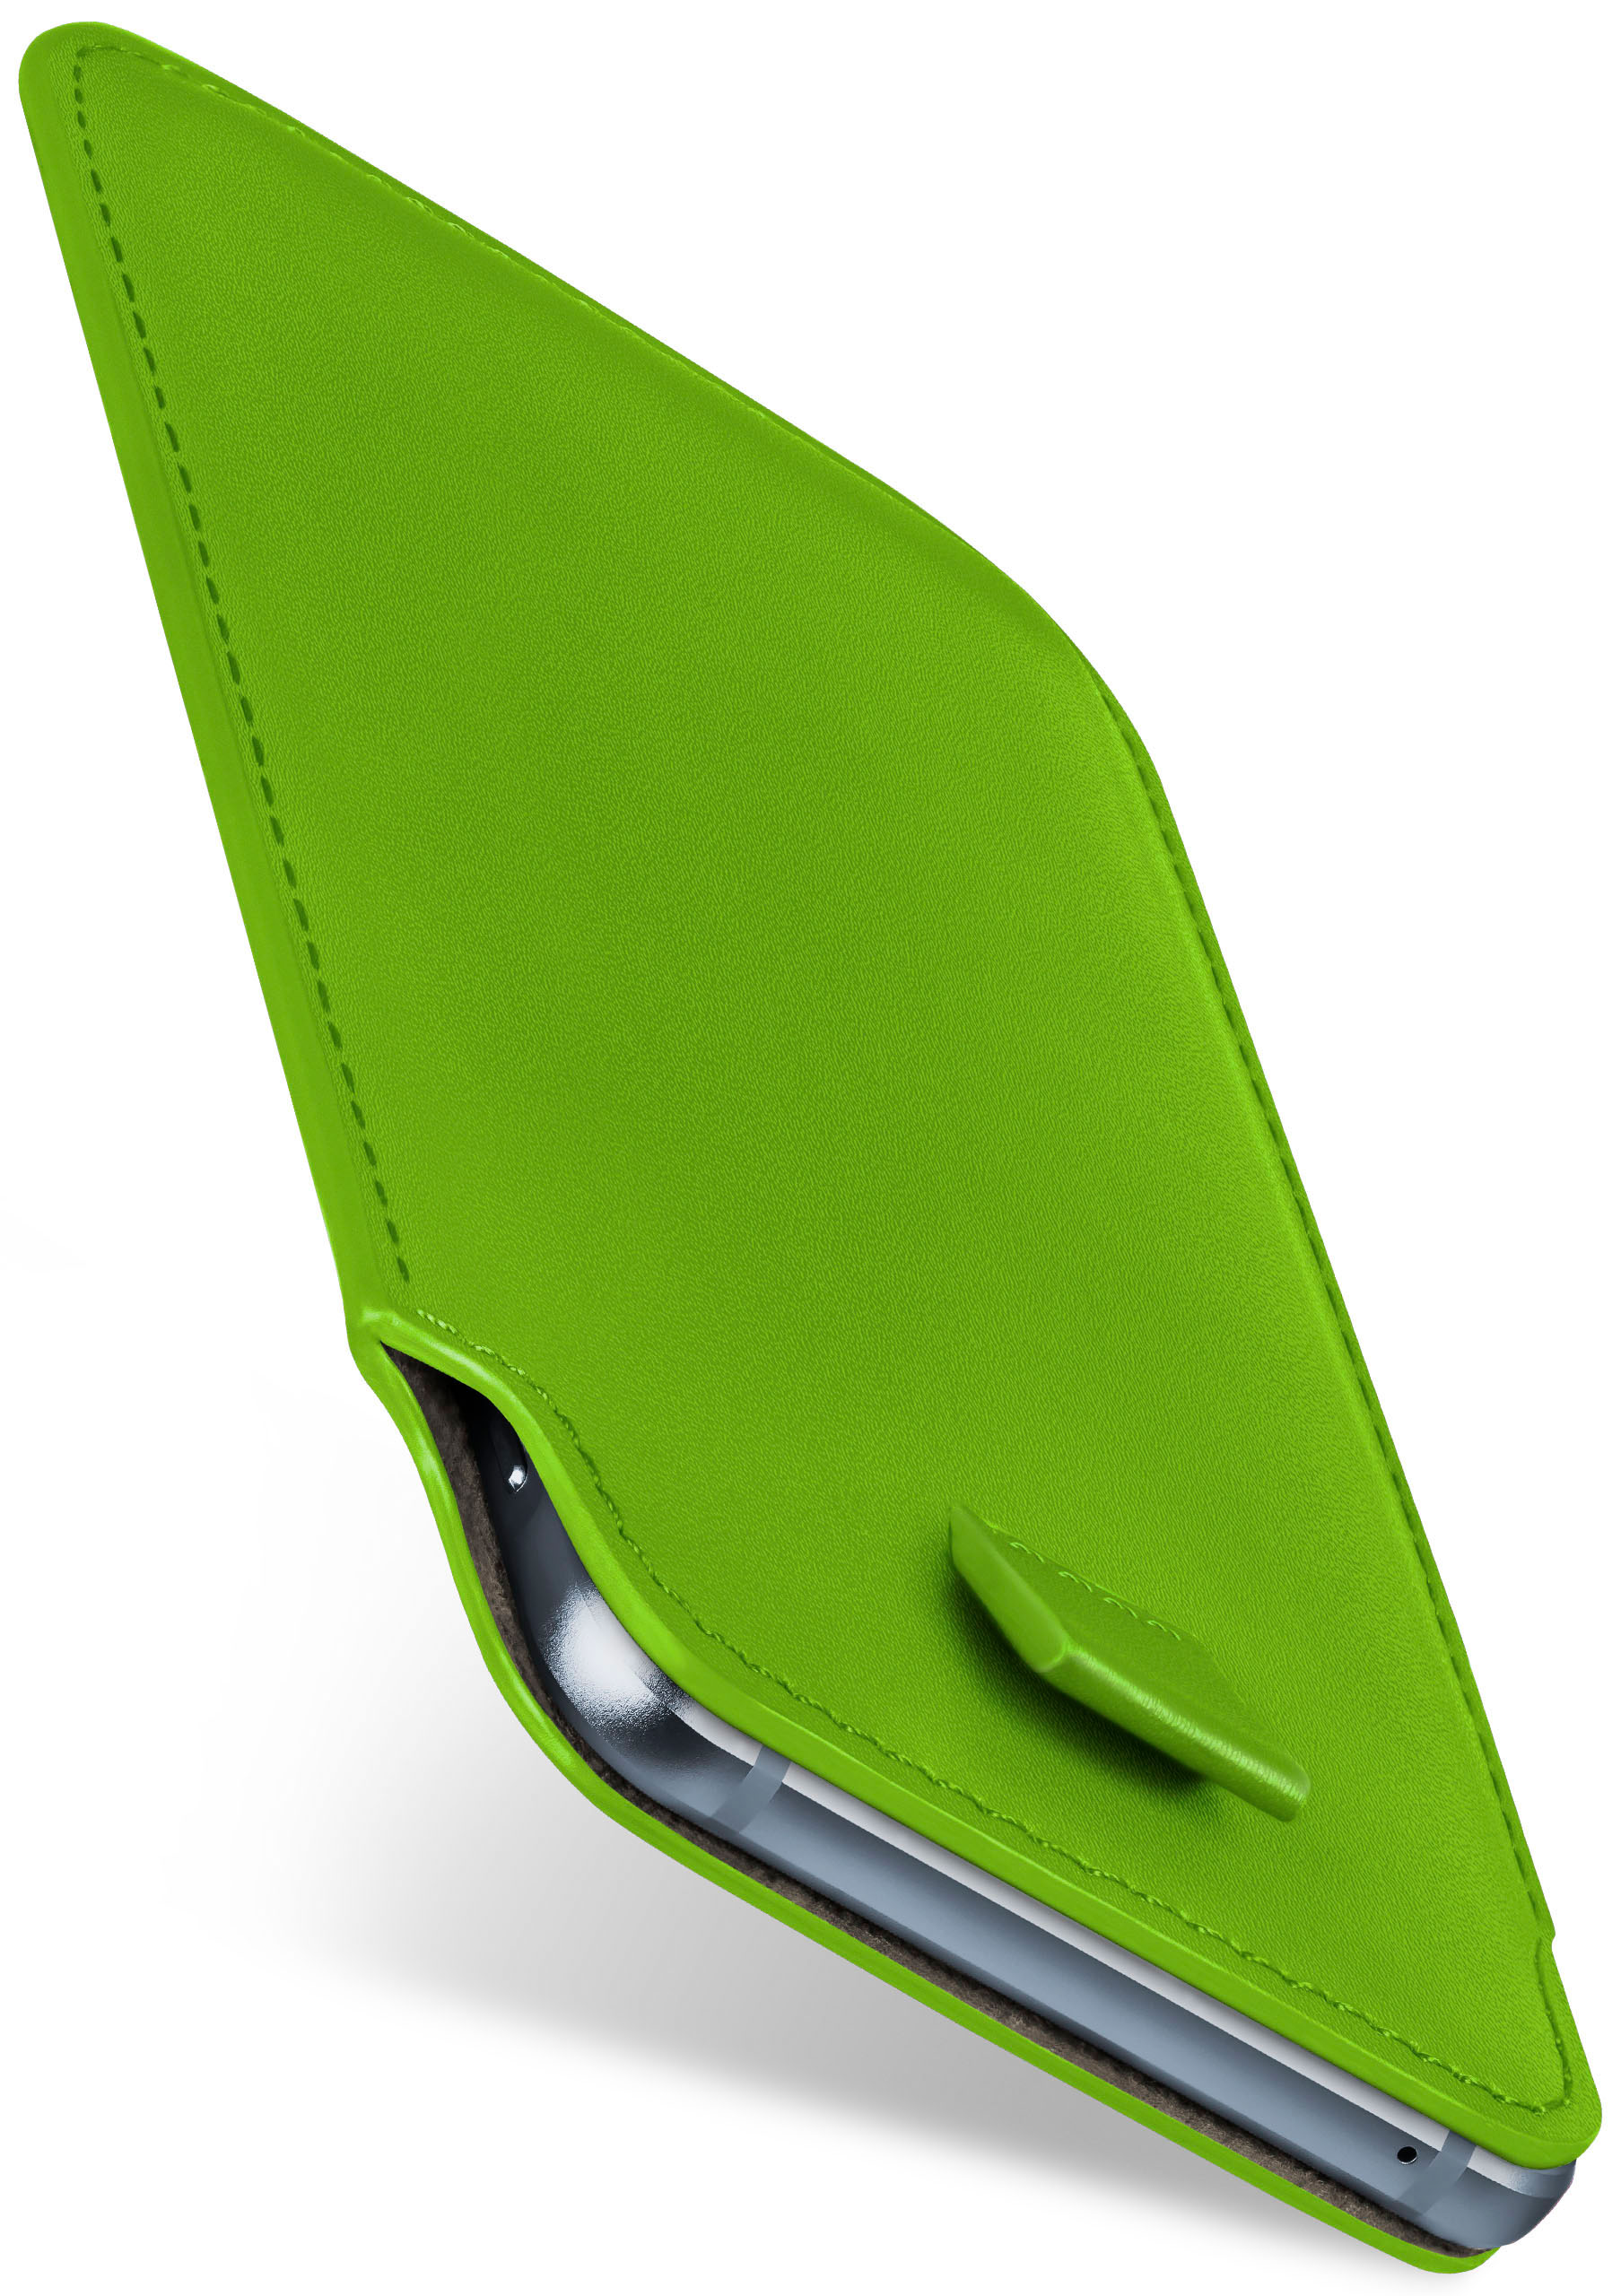 Slide MOEX Full Plus, Plus iPhone Case, / 6 6s Lime-Green Apple, Cover,